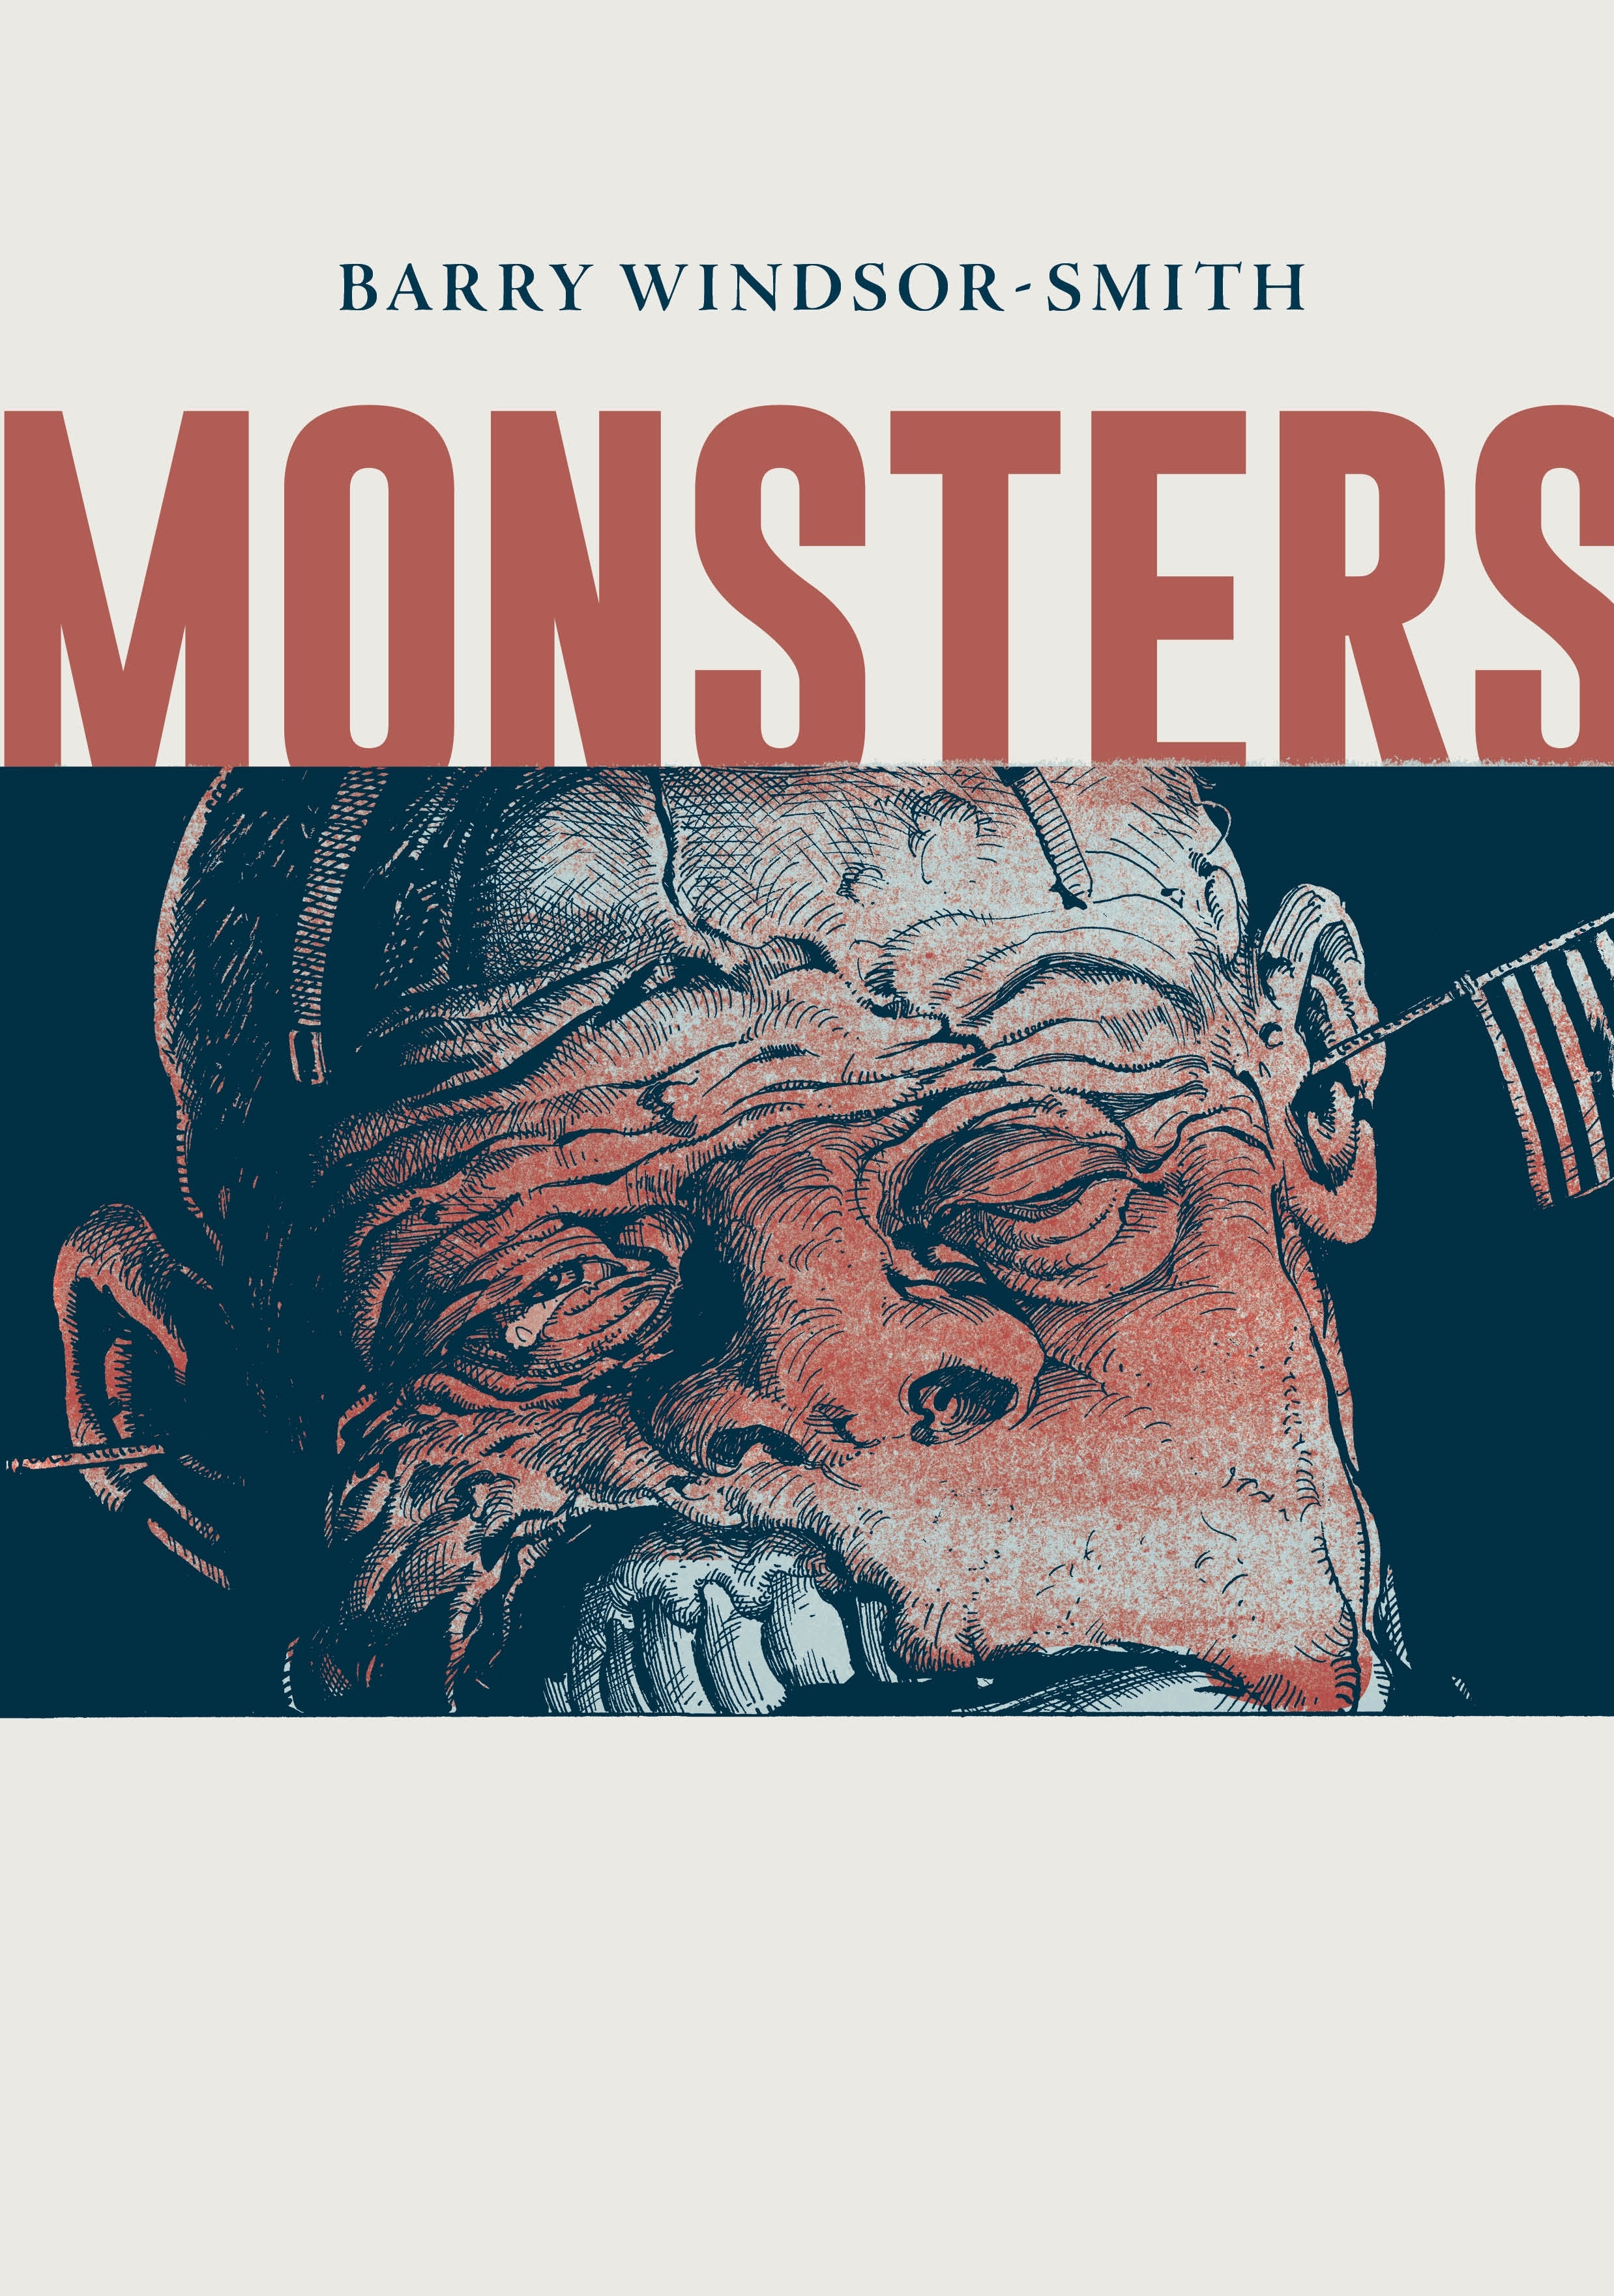 Book “Monsters” by Barry Windsor-Smith — April 29, 2021